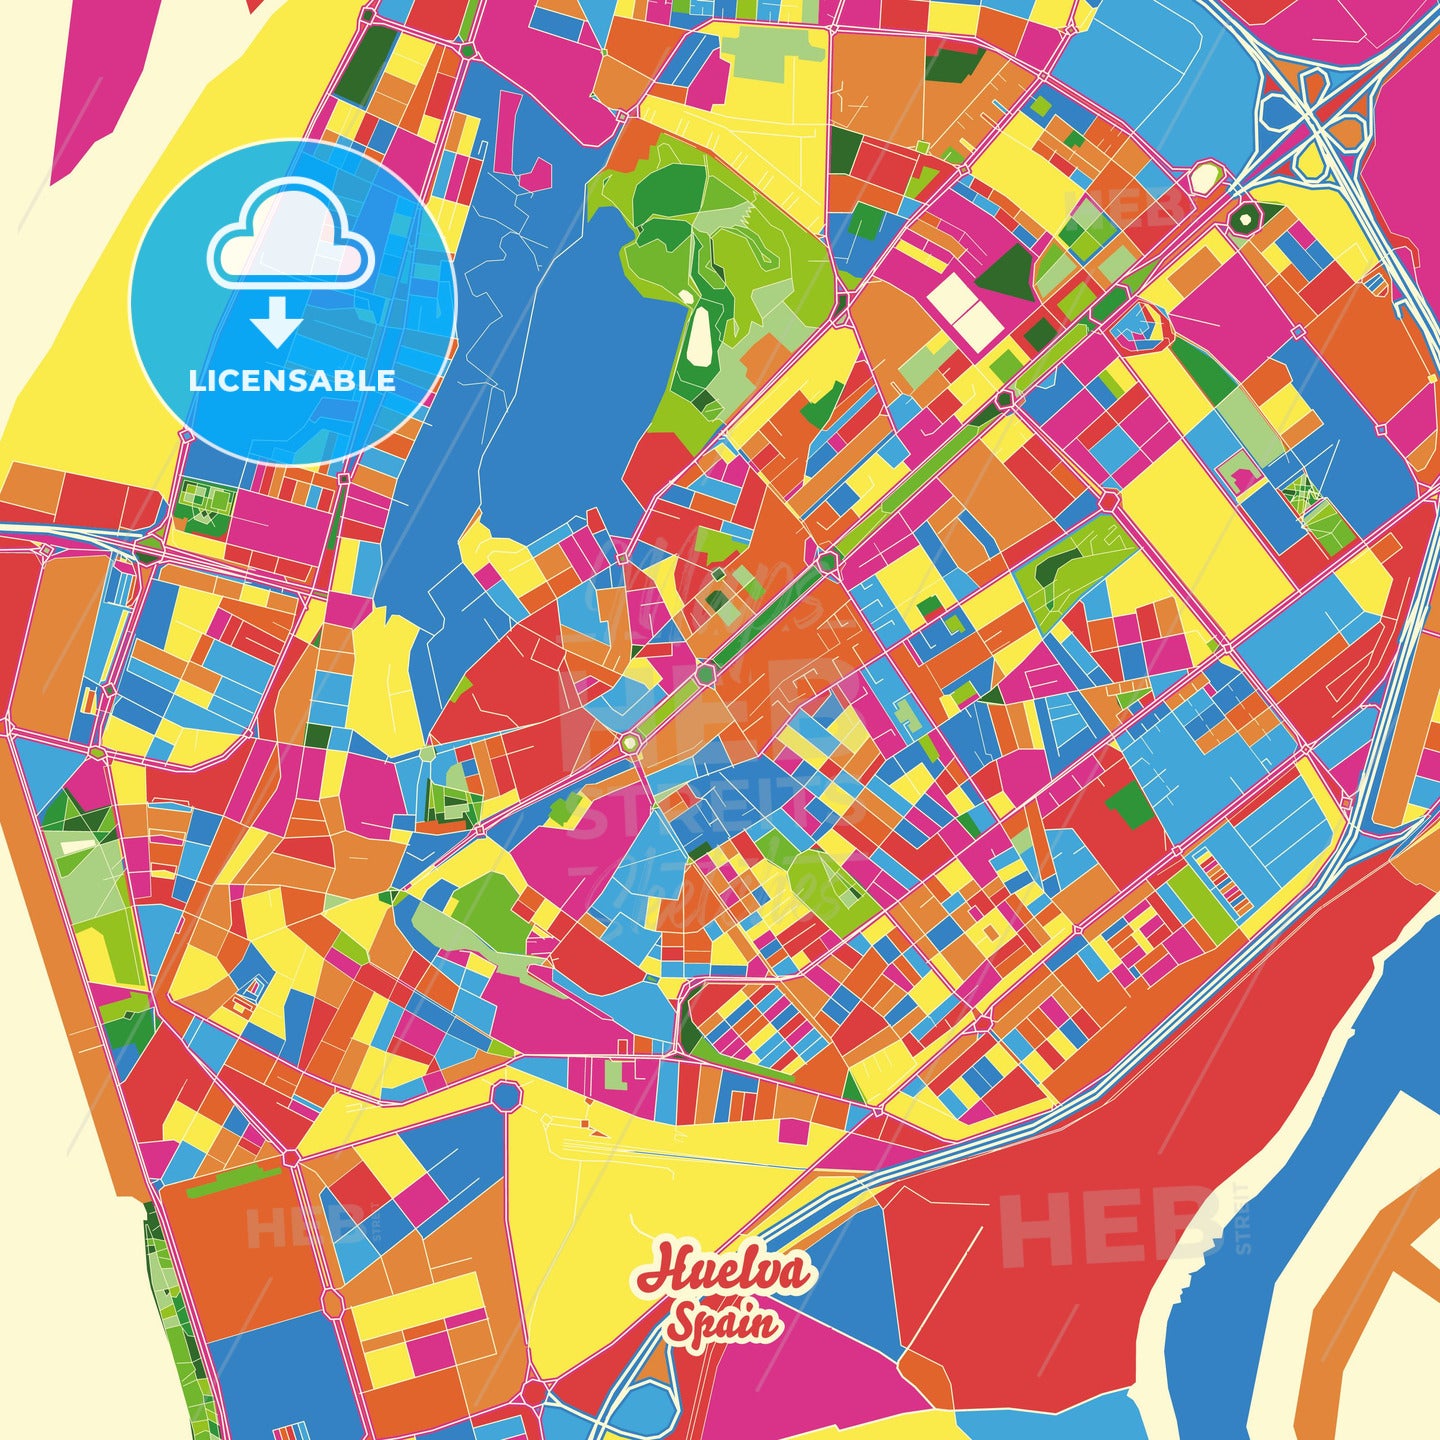 Huelva, Spain Crazy Colorful Street Map Poster Template - HEBSTREITS Sketches